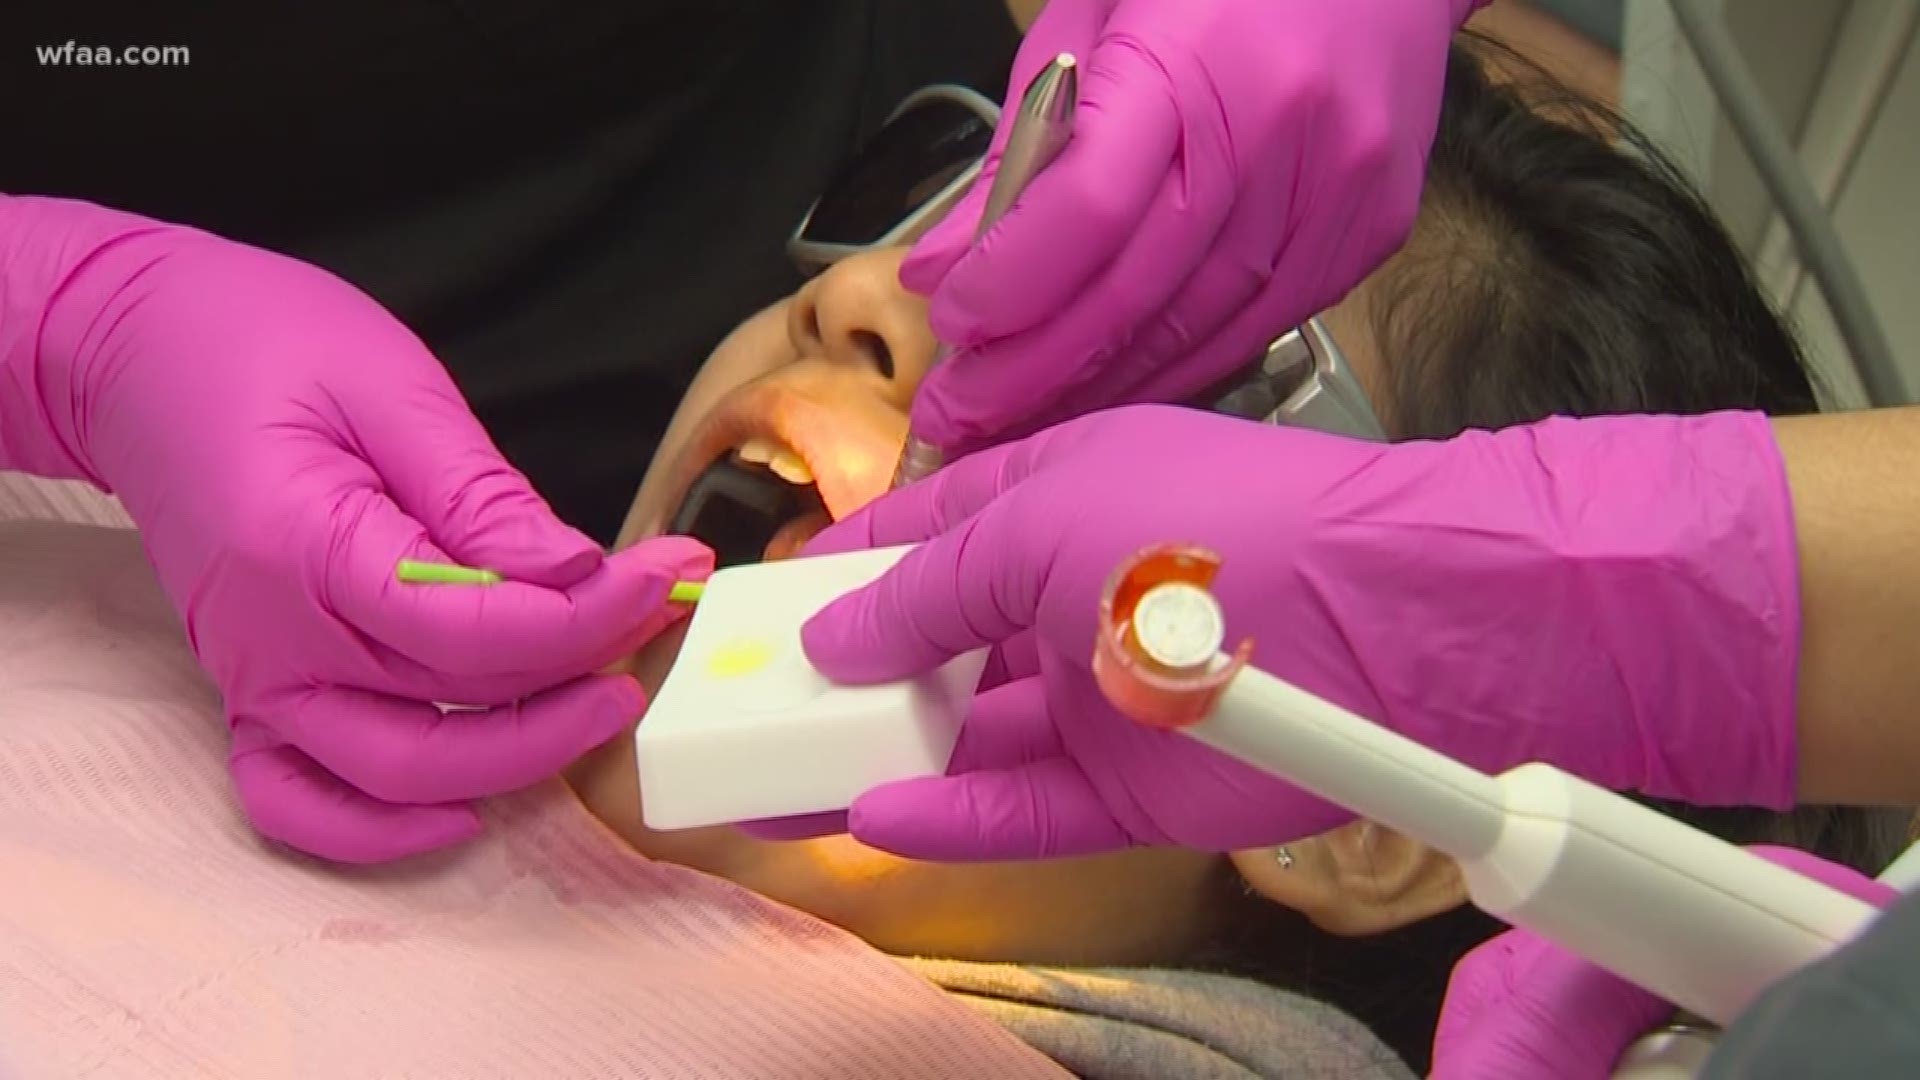 Dental subscription services gain popularity